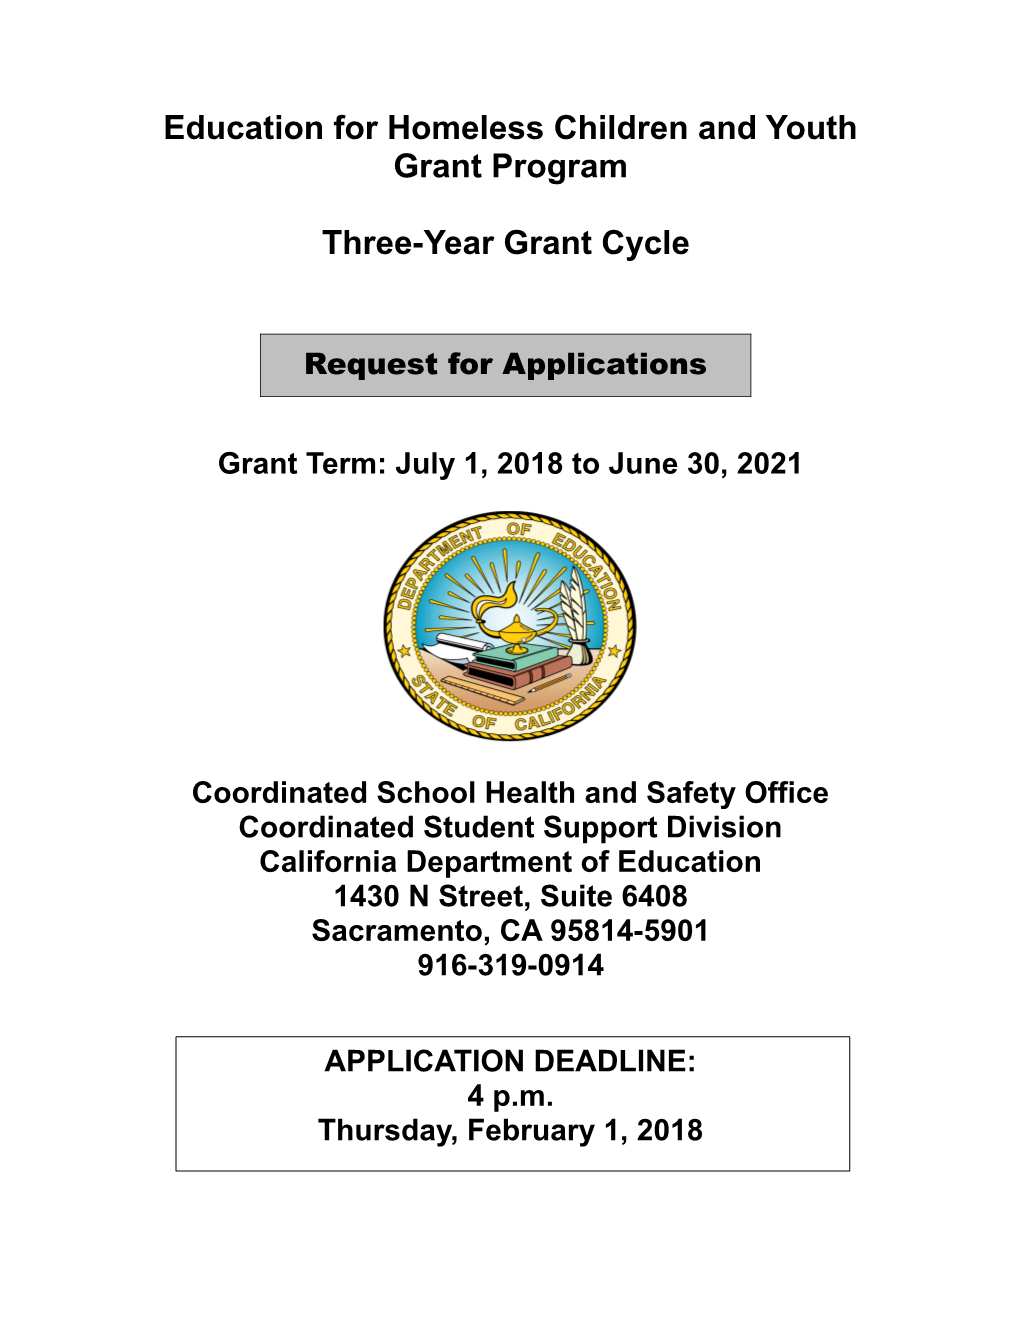 RFA-18: EHCY Request for Applicaitons (CA Dept of Education)